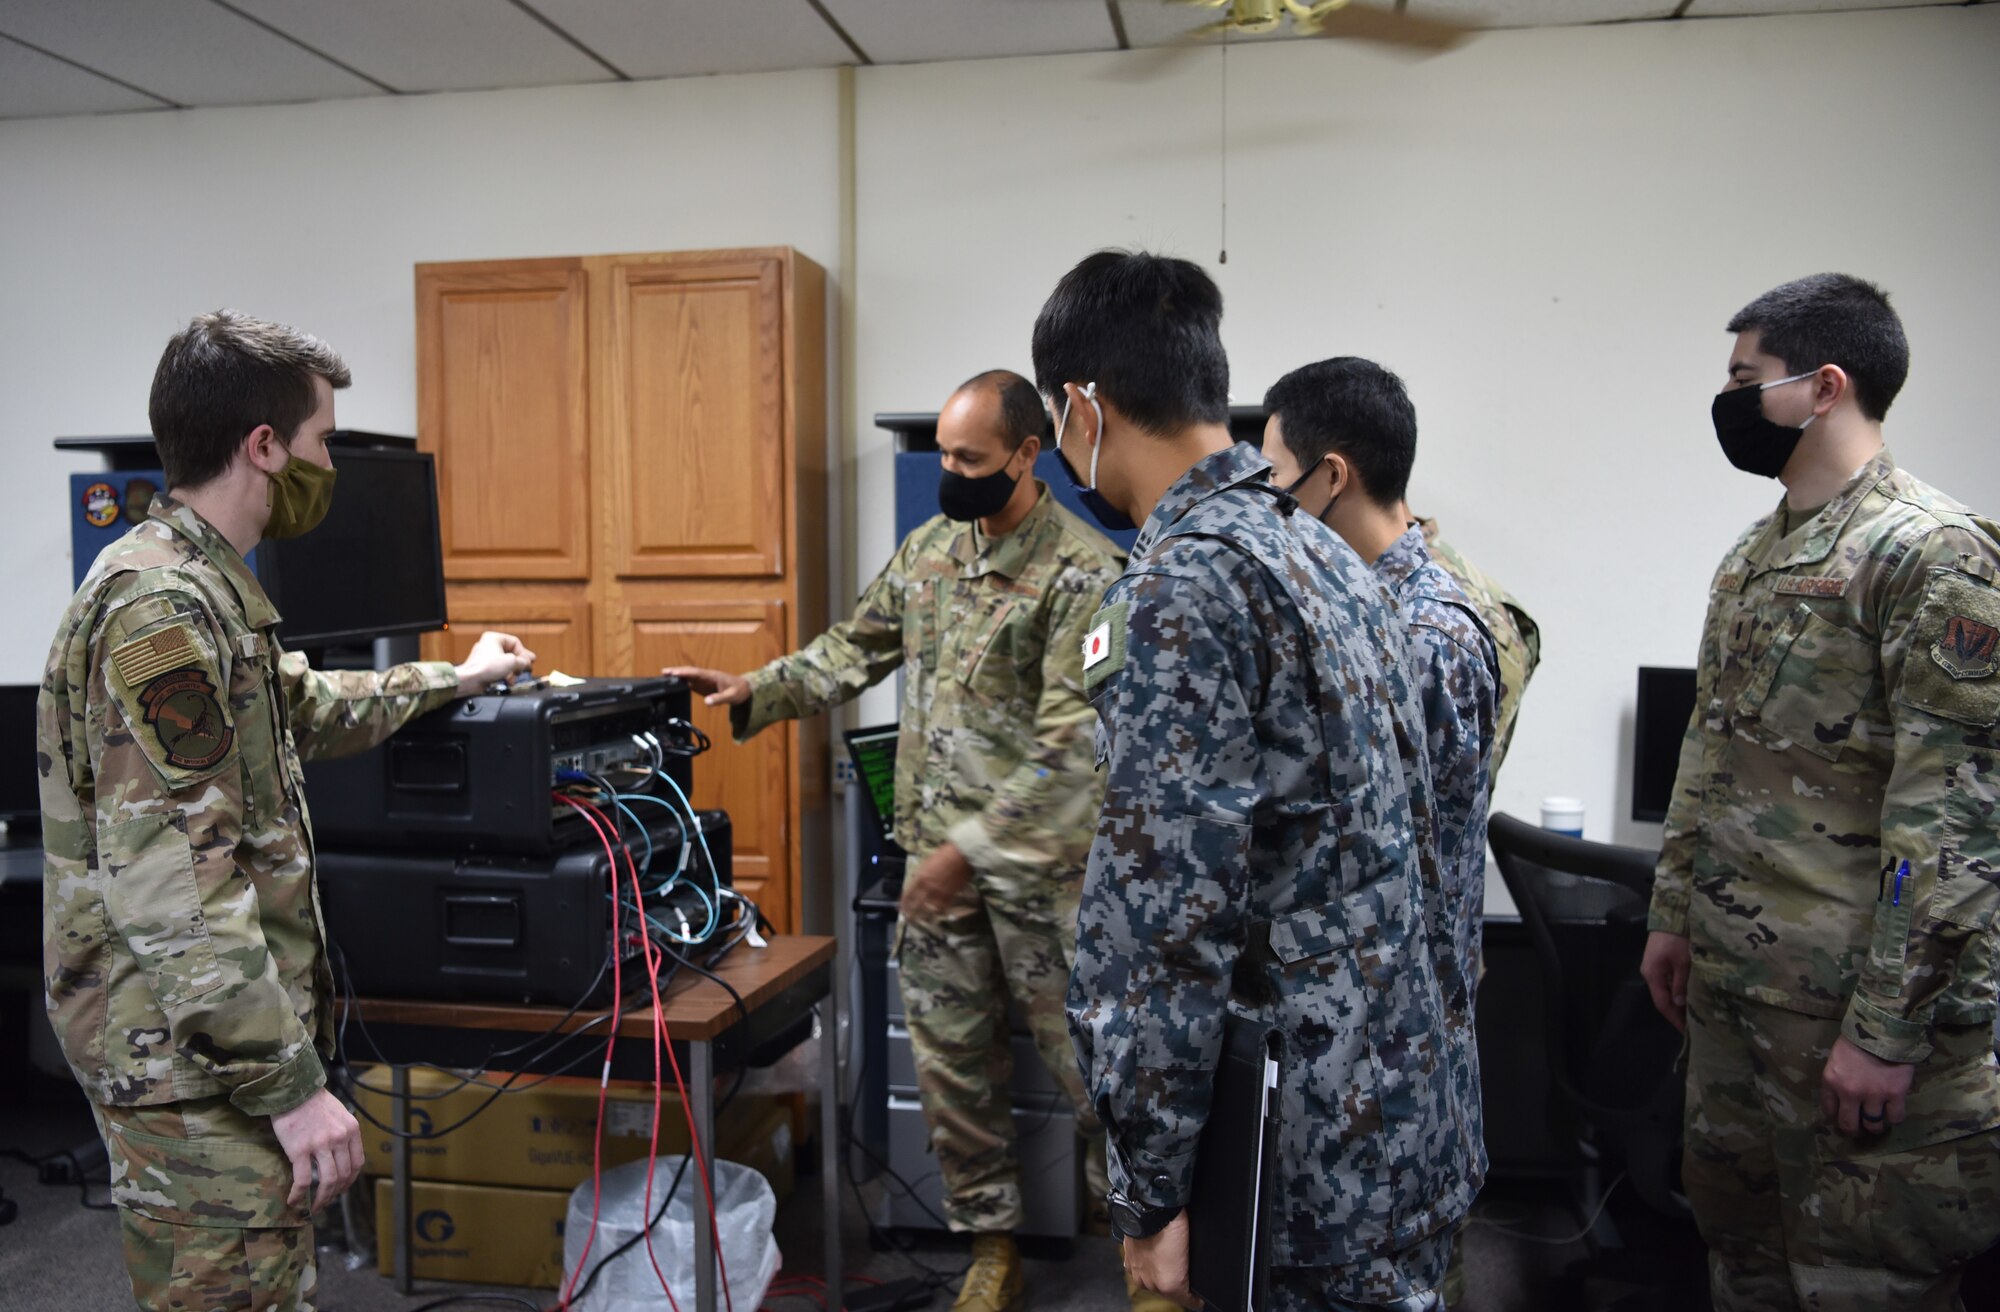 Senior Airman Gabriel Coleman, 552 Air Control Networks Squadron, and Master Sgt. Christopher Bailey, Pacific Air Command A3/6, explain the capabilities of a deployable cyber defense weapon system, Cyberspace Vulnerability Assessment/Hunter, to Lt. Col. Akio Ohigashi and Capt. Shumpei Kawano from the Japanese Air Self-Defense Force. The system is used by the 552 ACNS Mission Defense Team to defend the 552nd Air Control Wing's Control & Reporting Centers and E-3 fleet and ground systems from cyber threats. (Air Force photo by Kimberly Woodruff)